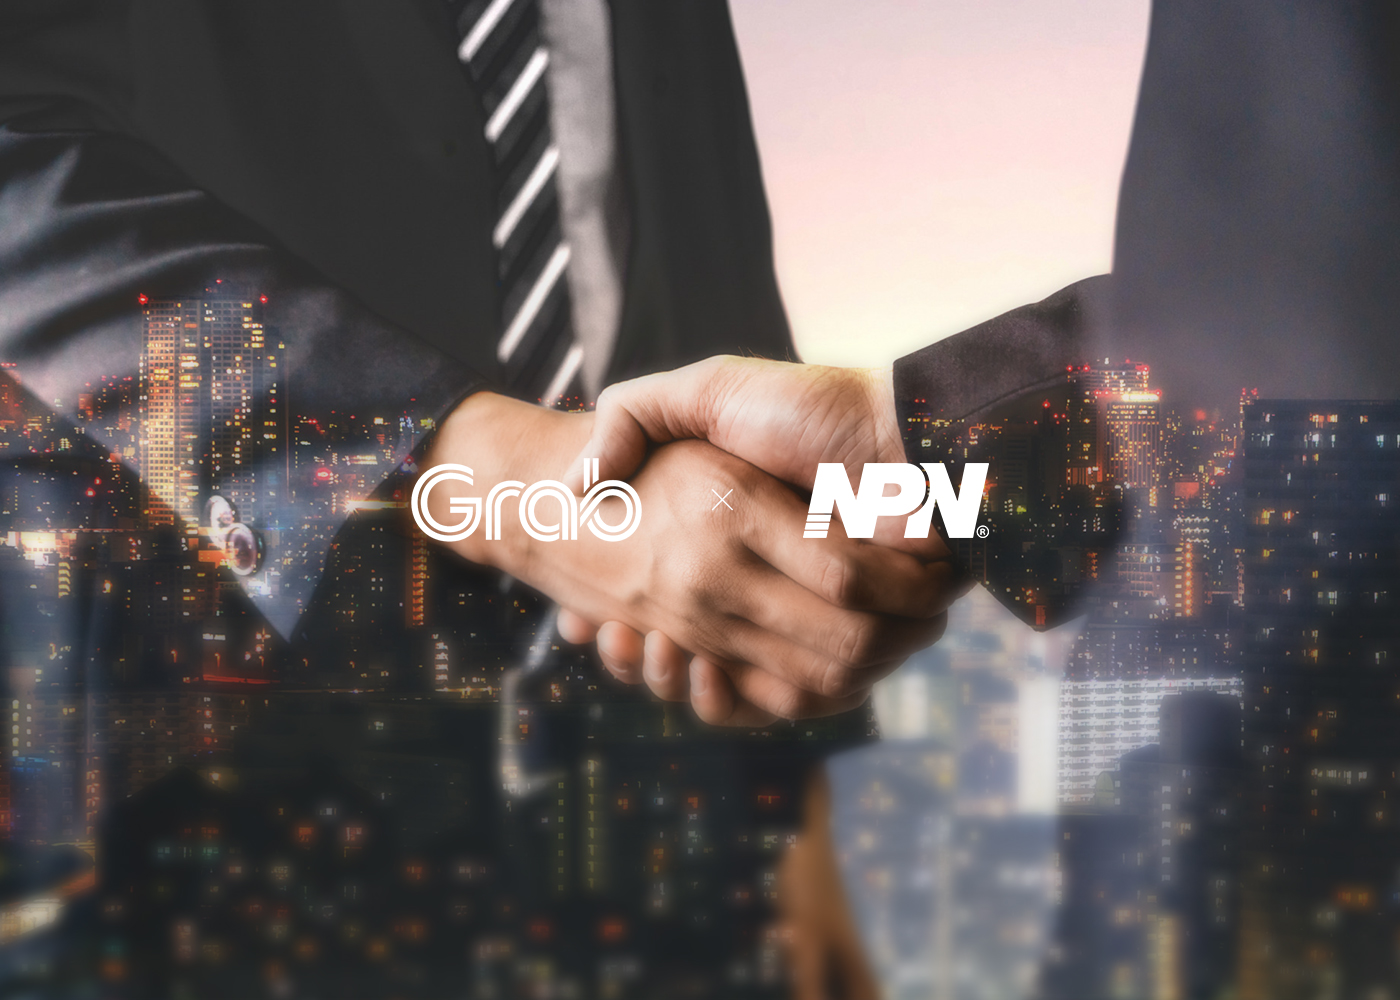 Grab Partners With NPN to Strengthen Digitalisation For Its Merchant Sales